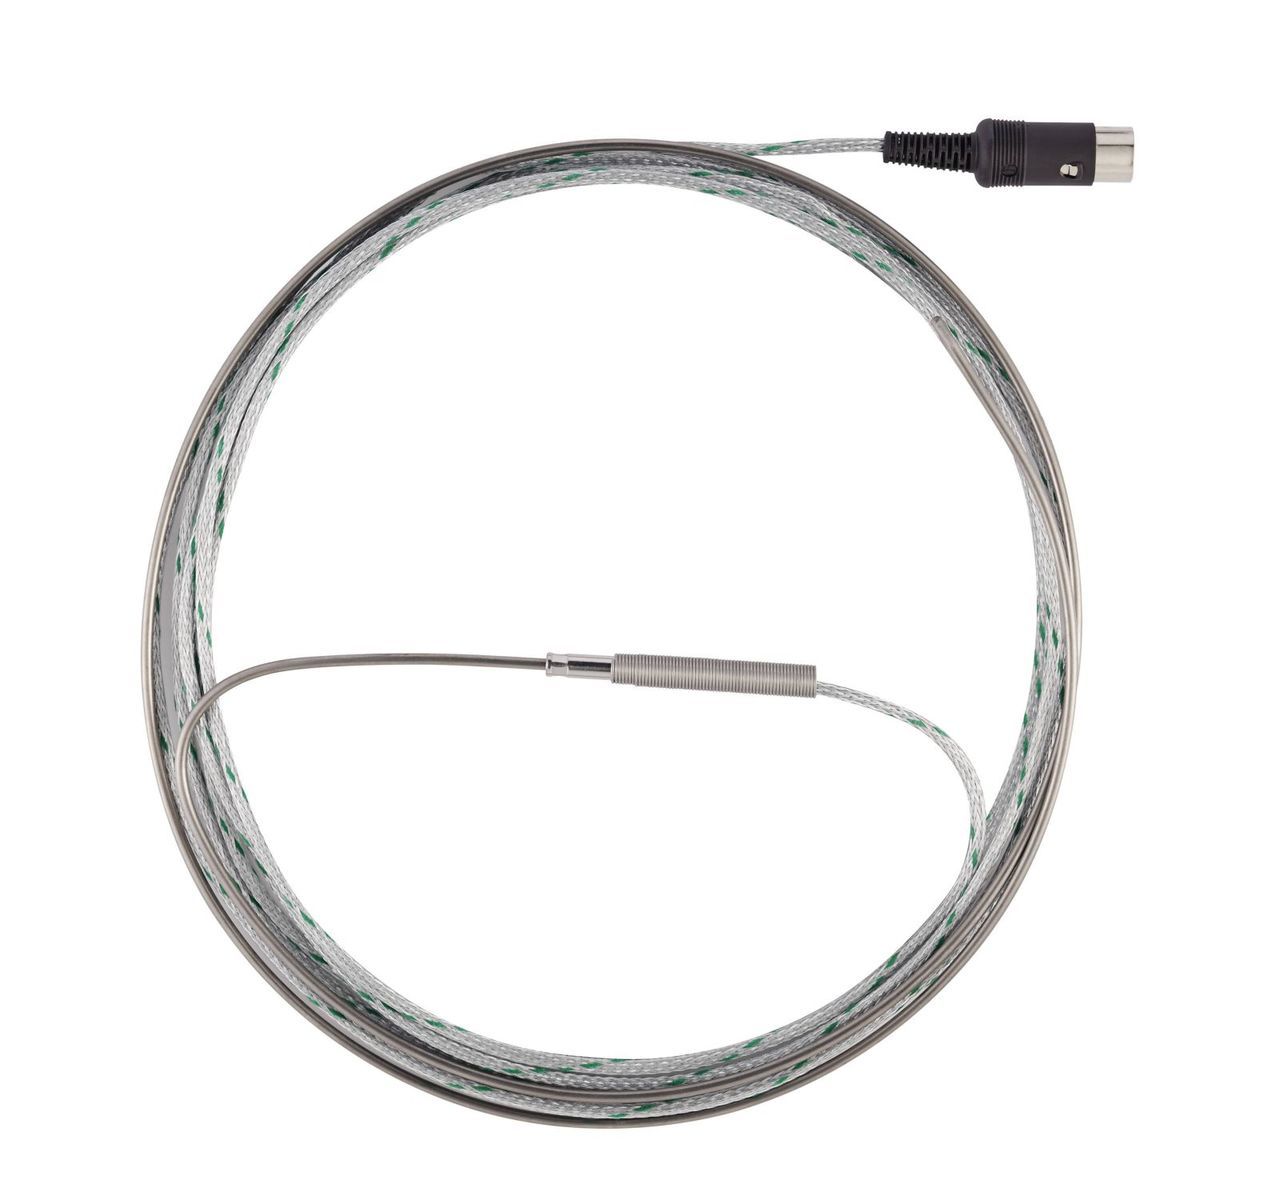 products-0430-0066_thermocouple_13_7.2__81533.1529425833.1280.1280.jpg